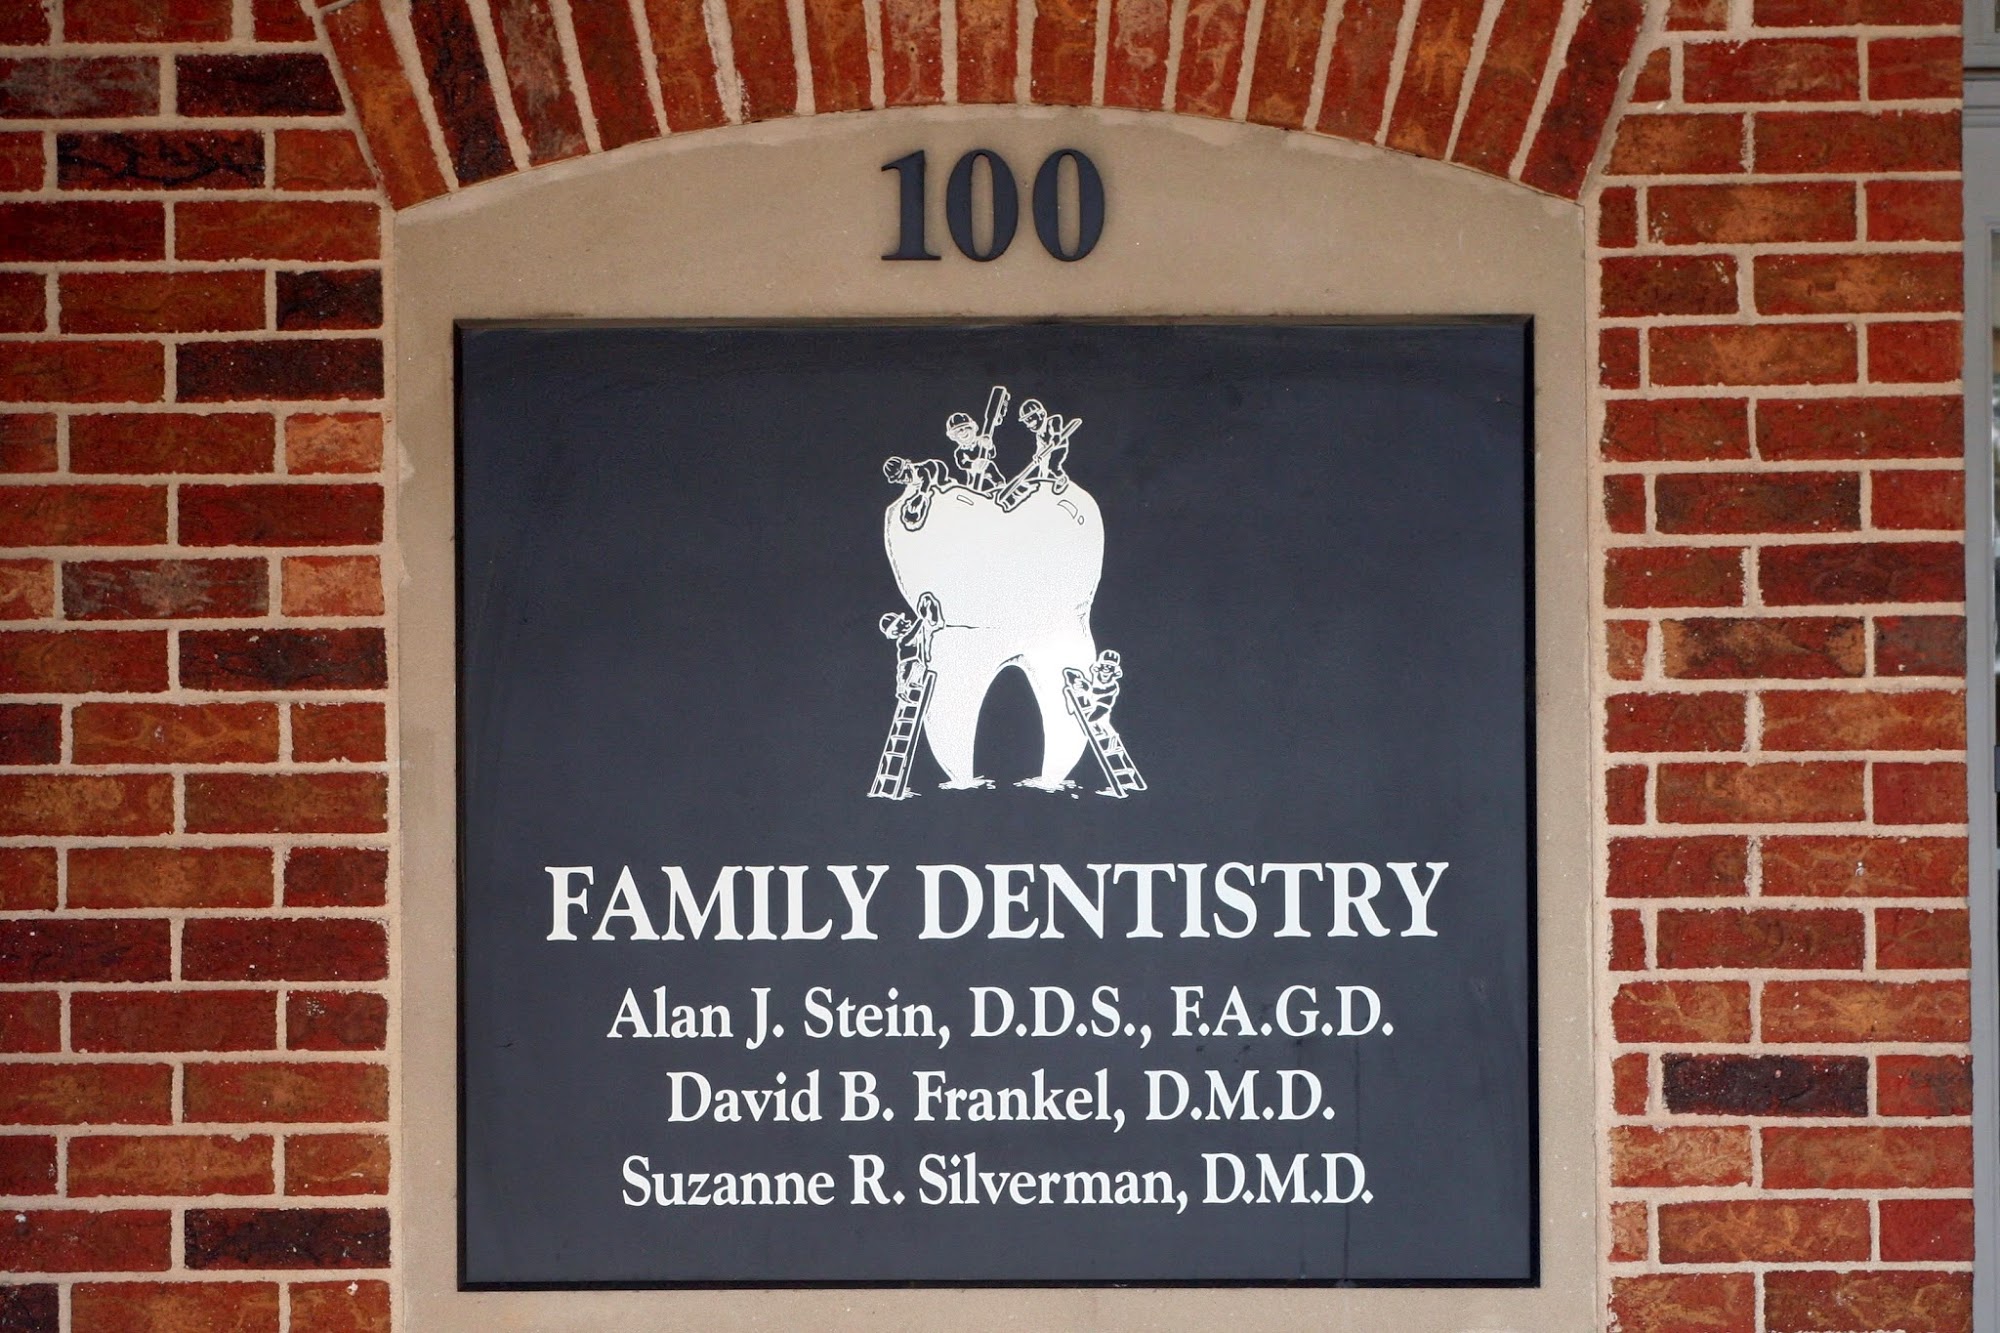 Decatur Family & Cosmetic Dentistry